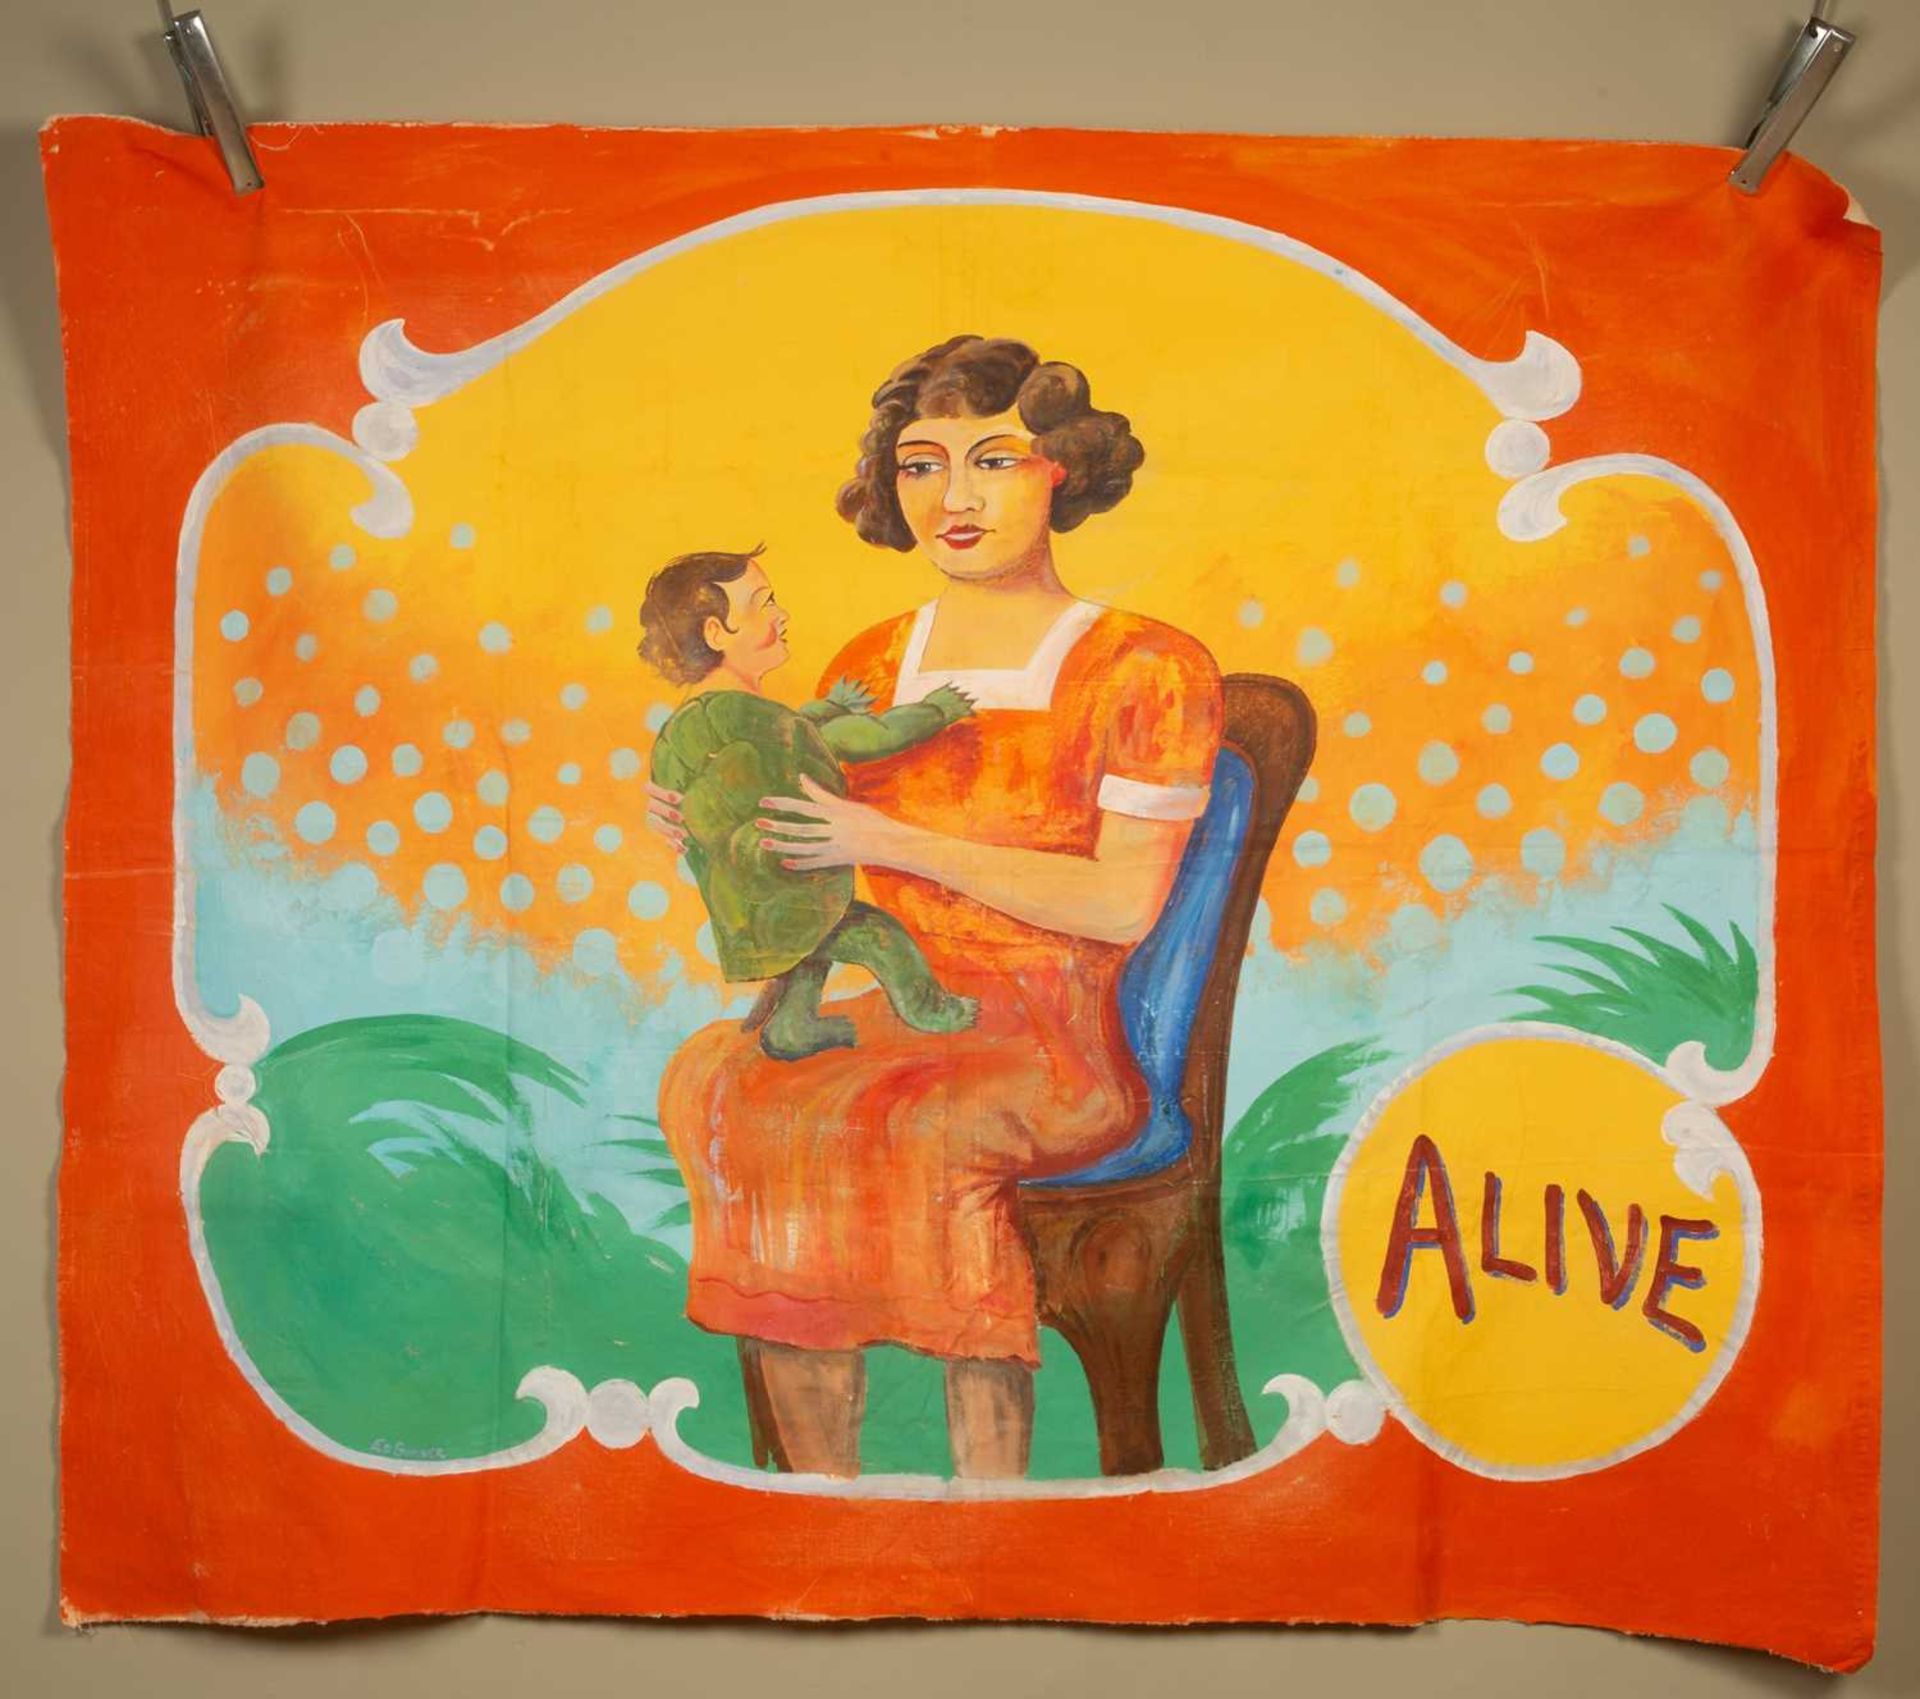 A painted canvas circus or fairground advertising sign for a Turtle Boy, "Alive", 127cm wide,